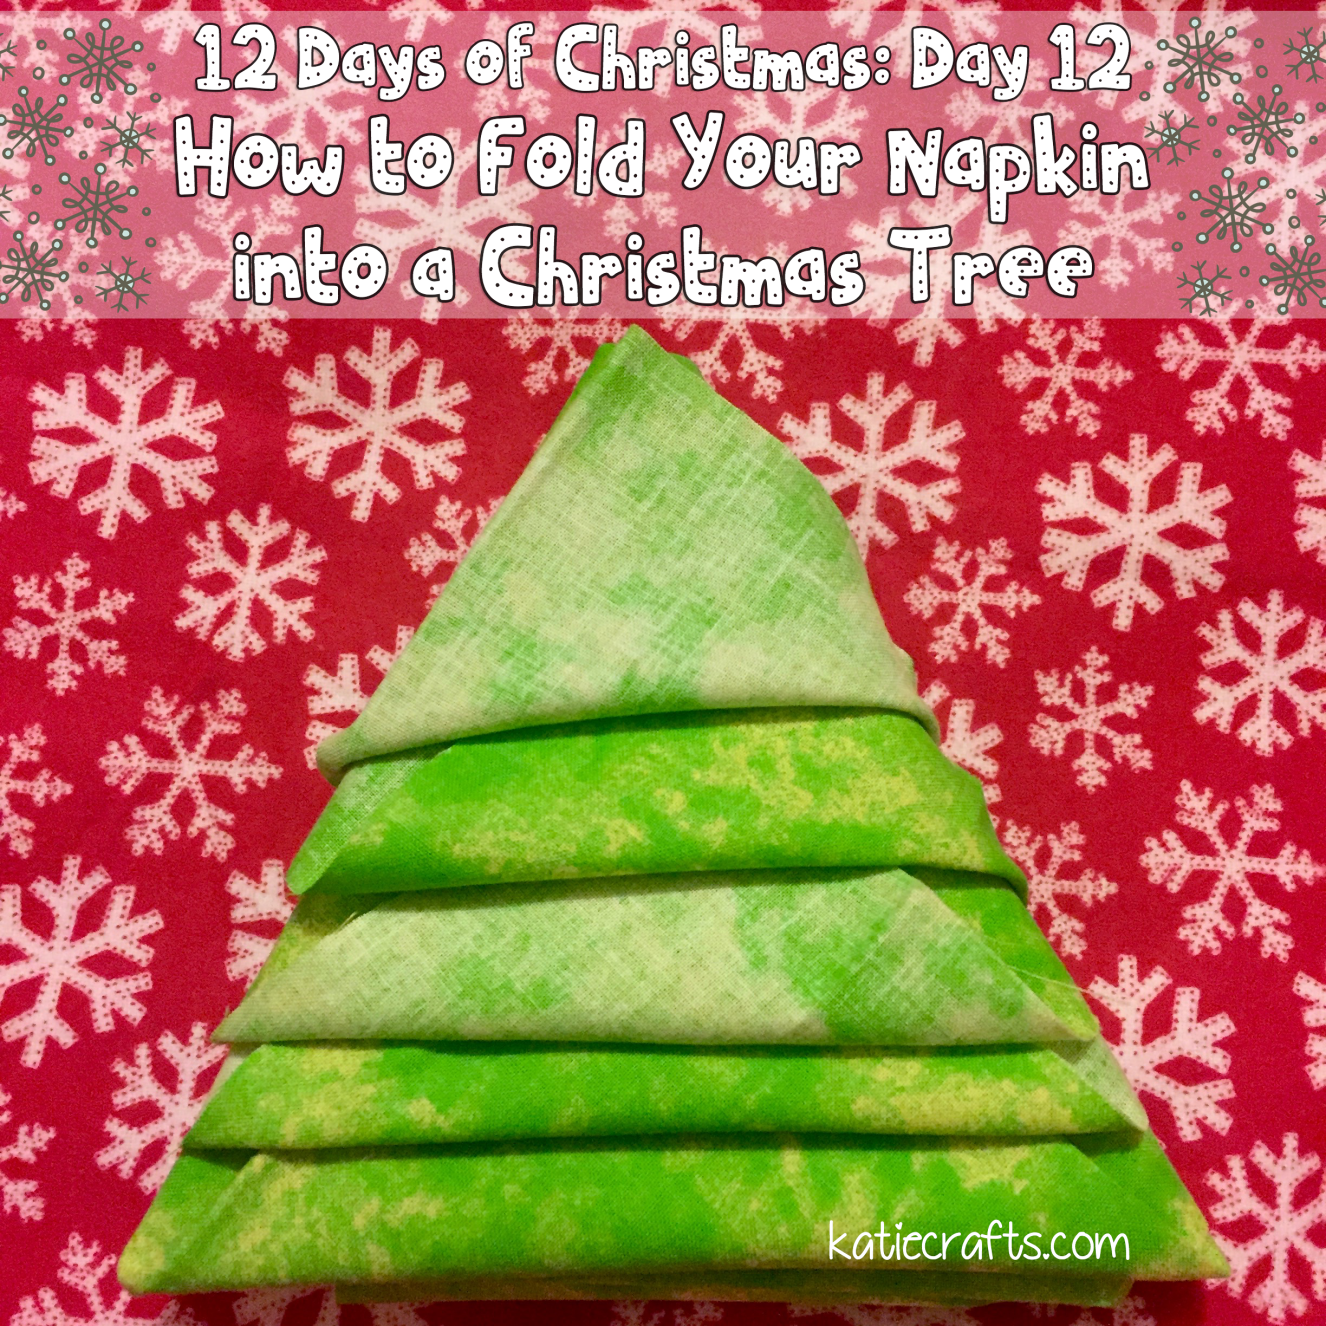 How to Fold Your Napkin into a Christmas Tree on Katie Crafts; https://www.katiecrafts.com